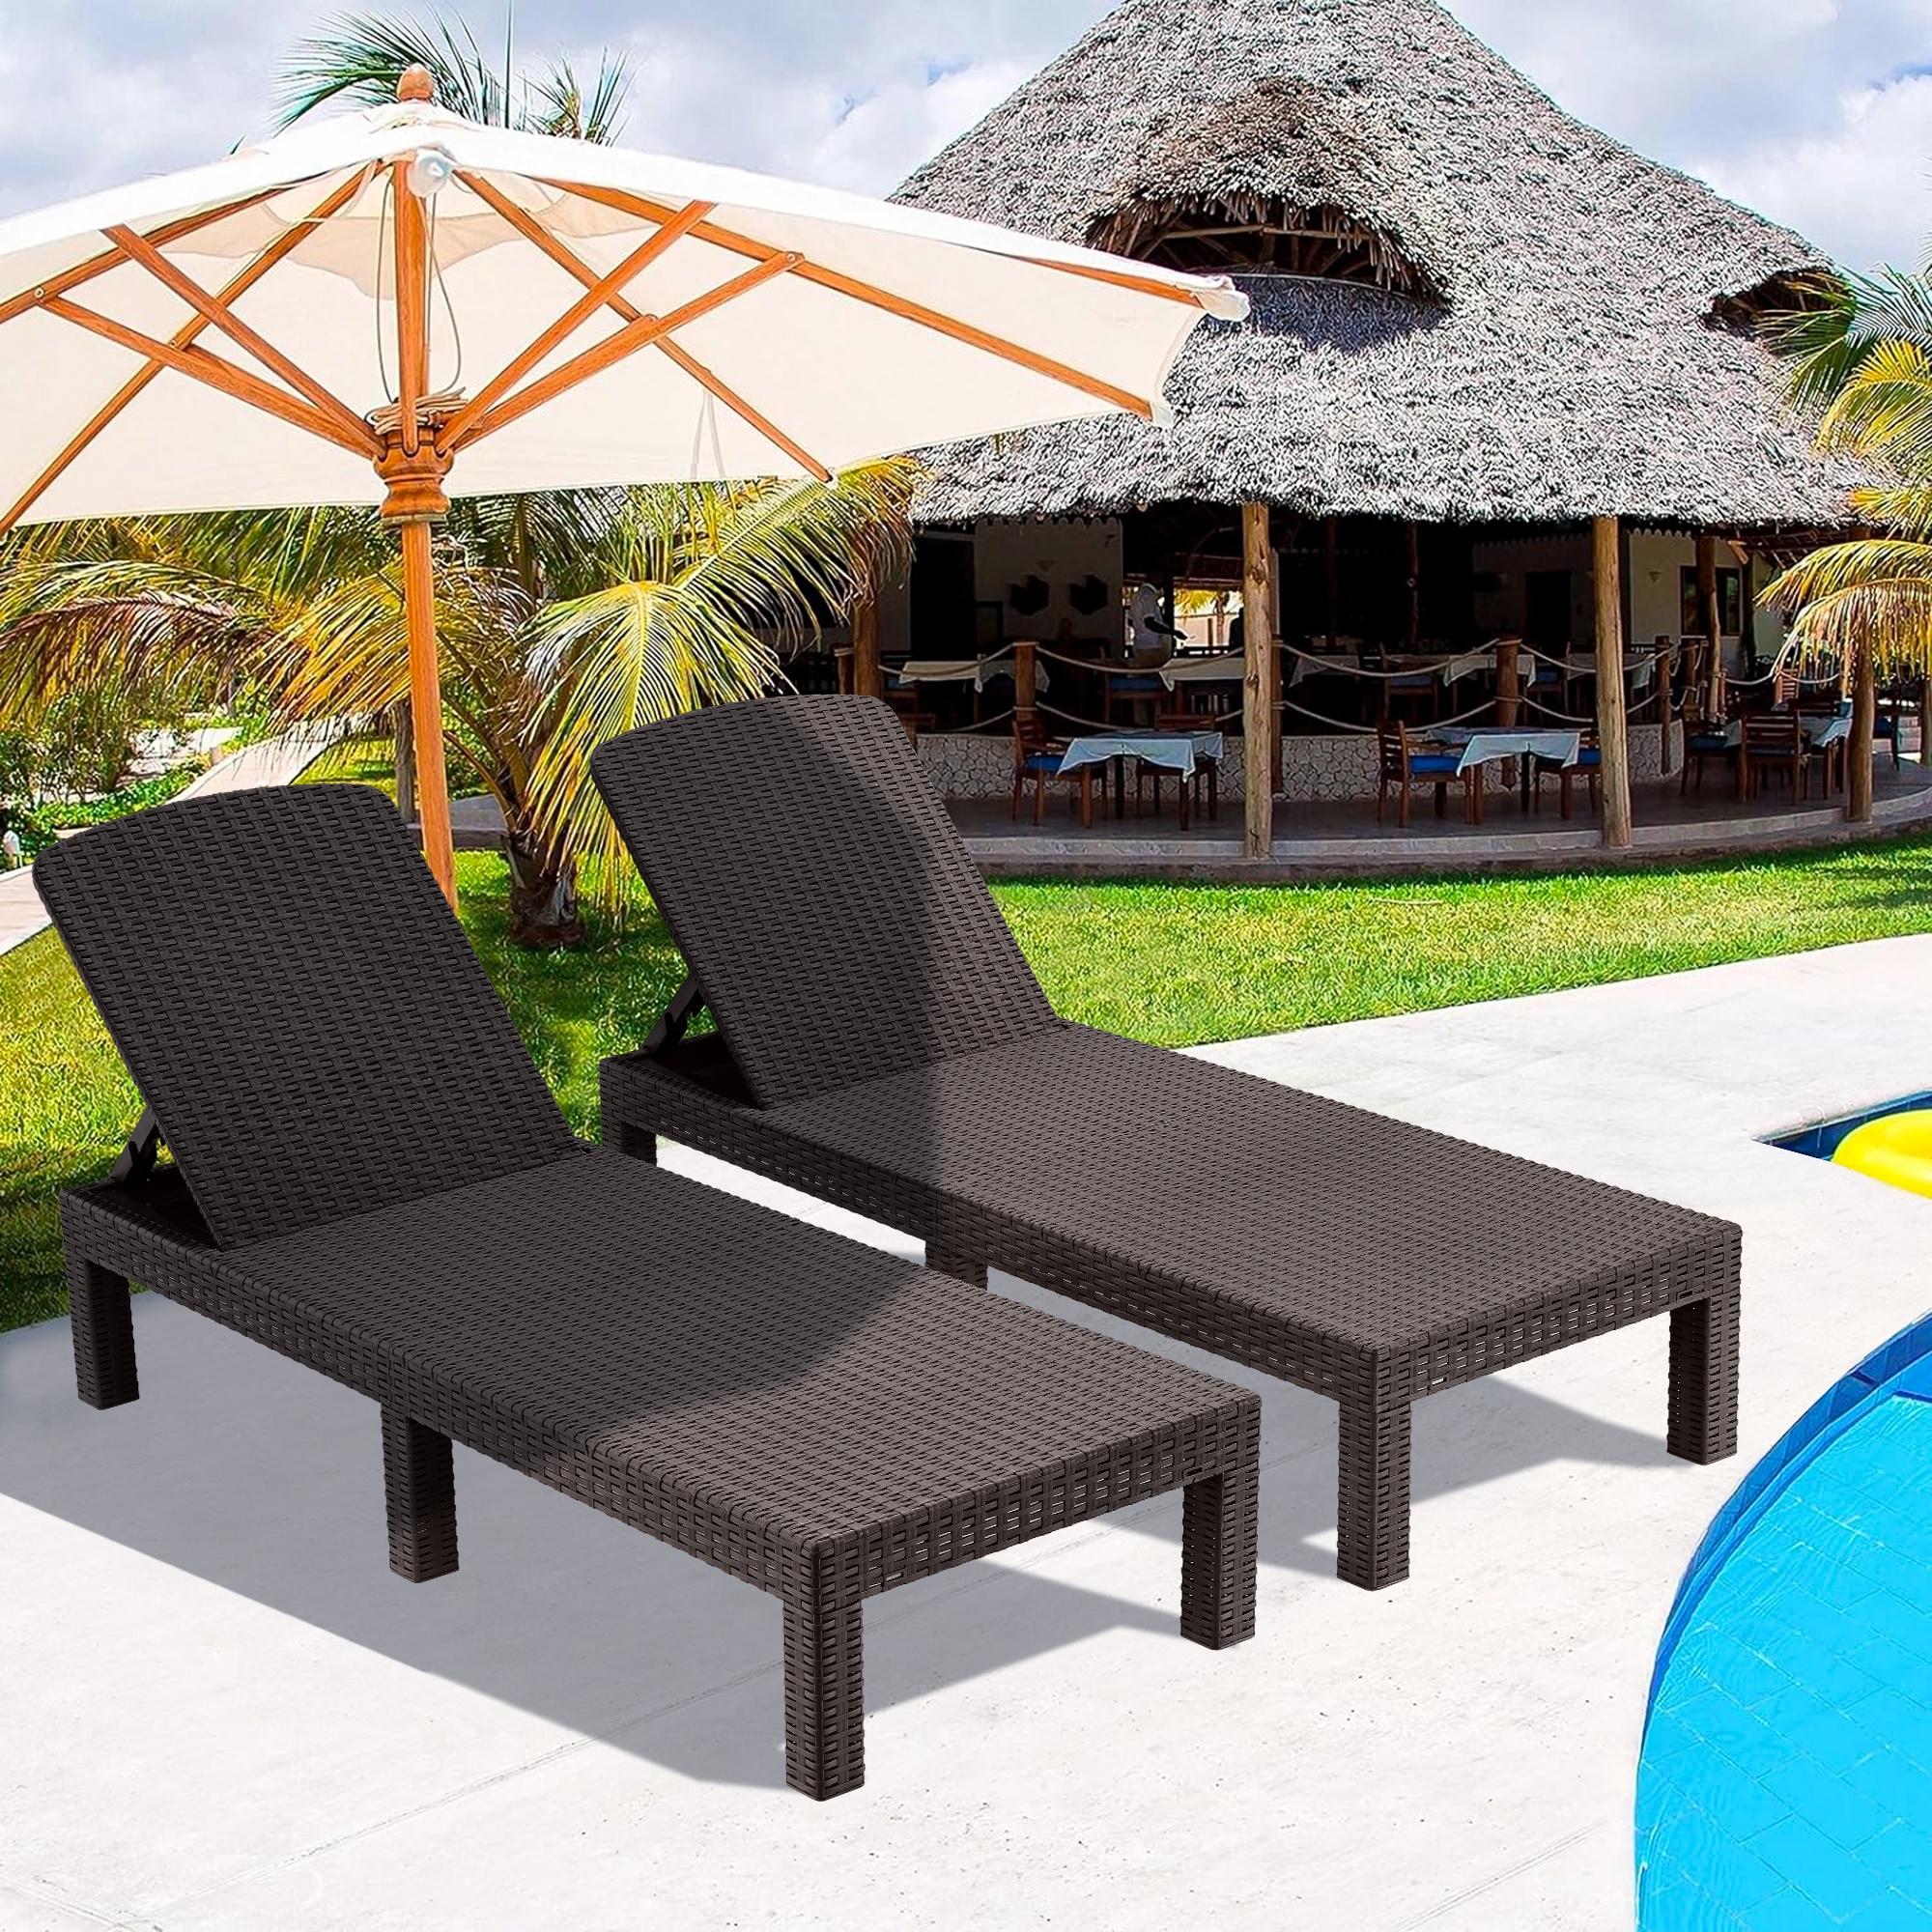 SYNGAR Patio Chaise Lounge Chairs Set of 2, Adjustable Chaise for Outside, PP Resin Reclining Lounge Chairs, Outdoor Sun Loungers for Poolside Deck Garden, Espresso - image 3 of 10